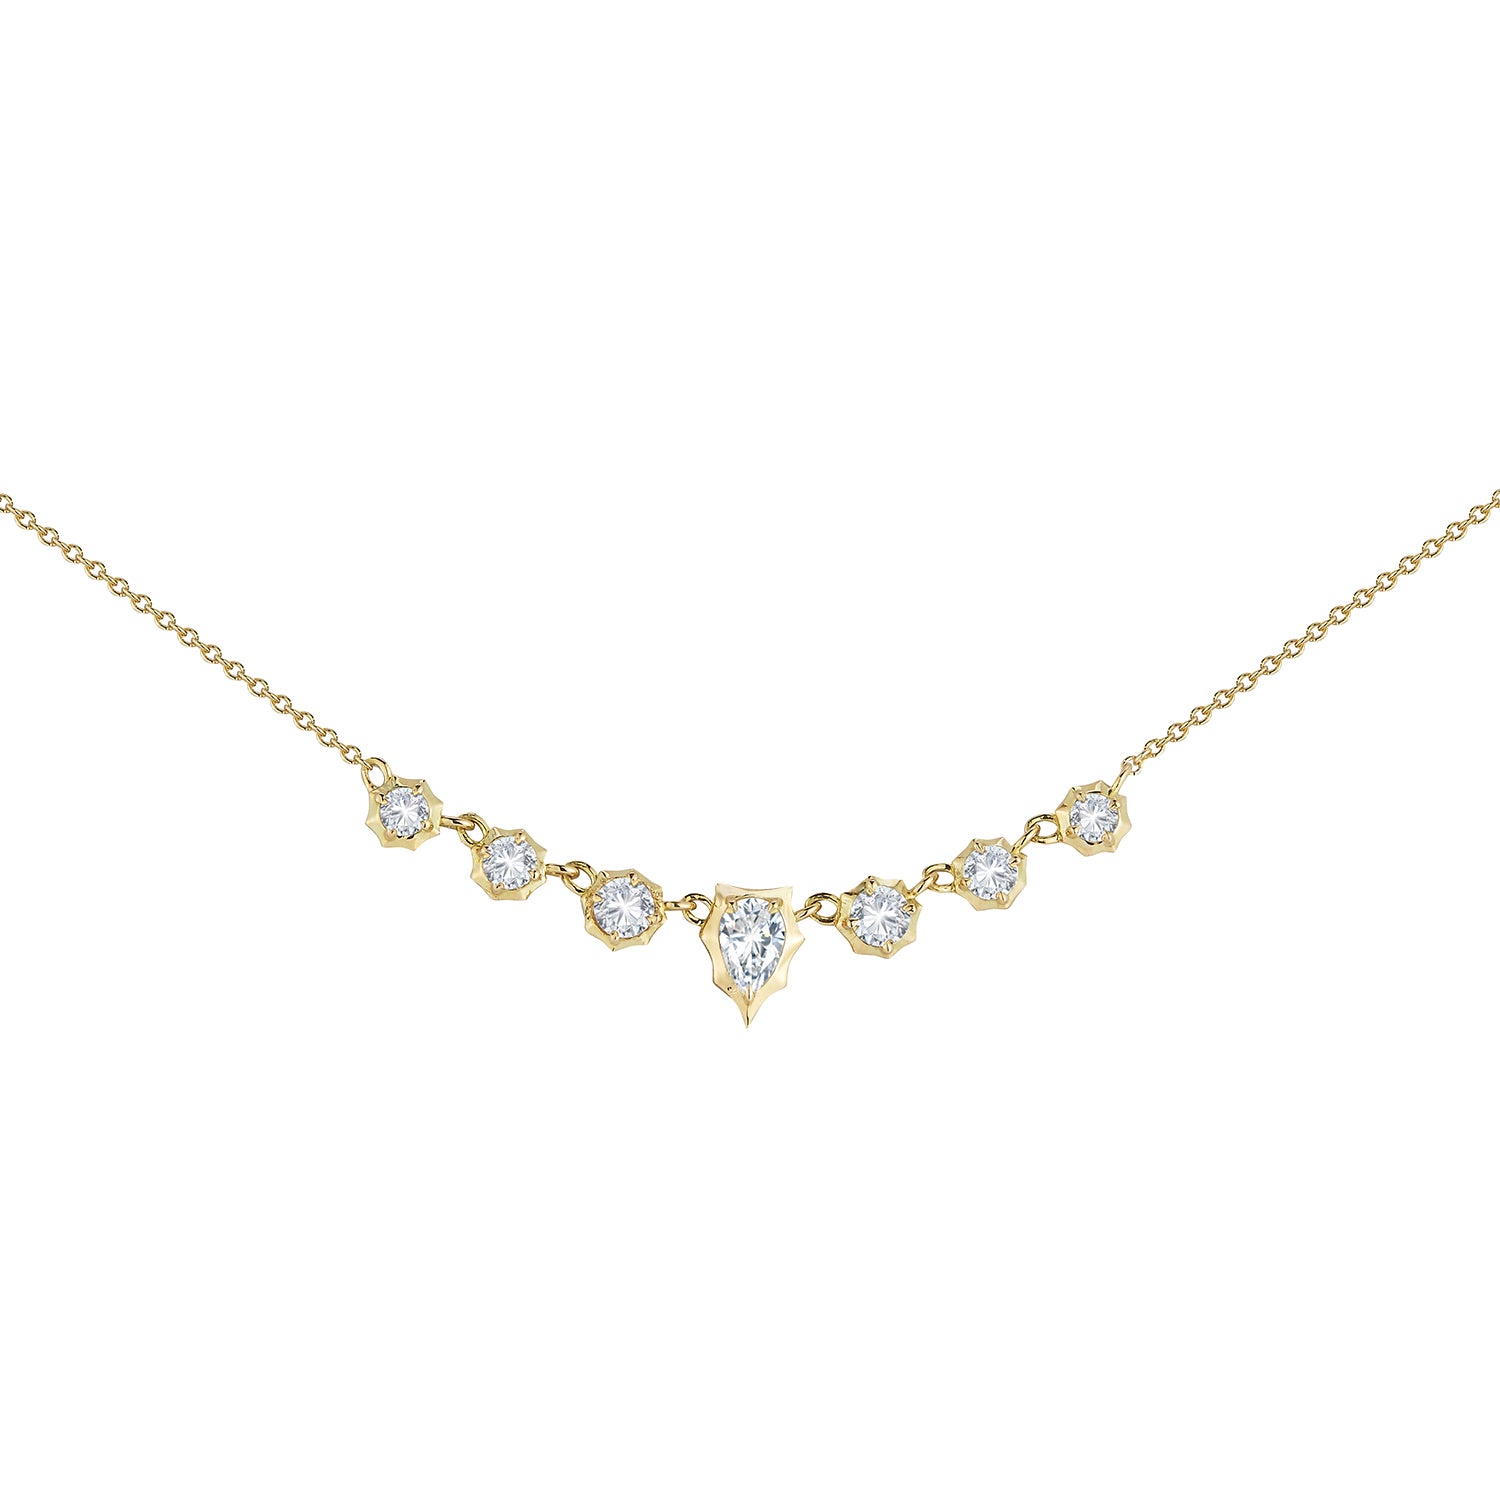 Small Envoy Necklace in 18K Yellow Gold